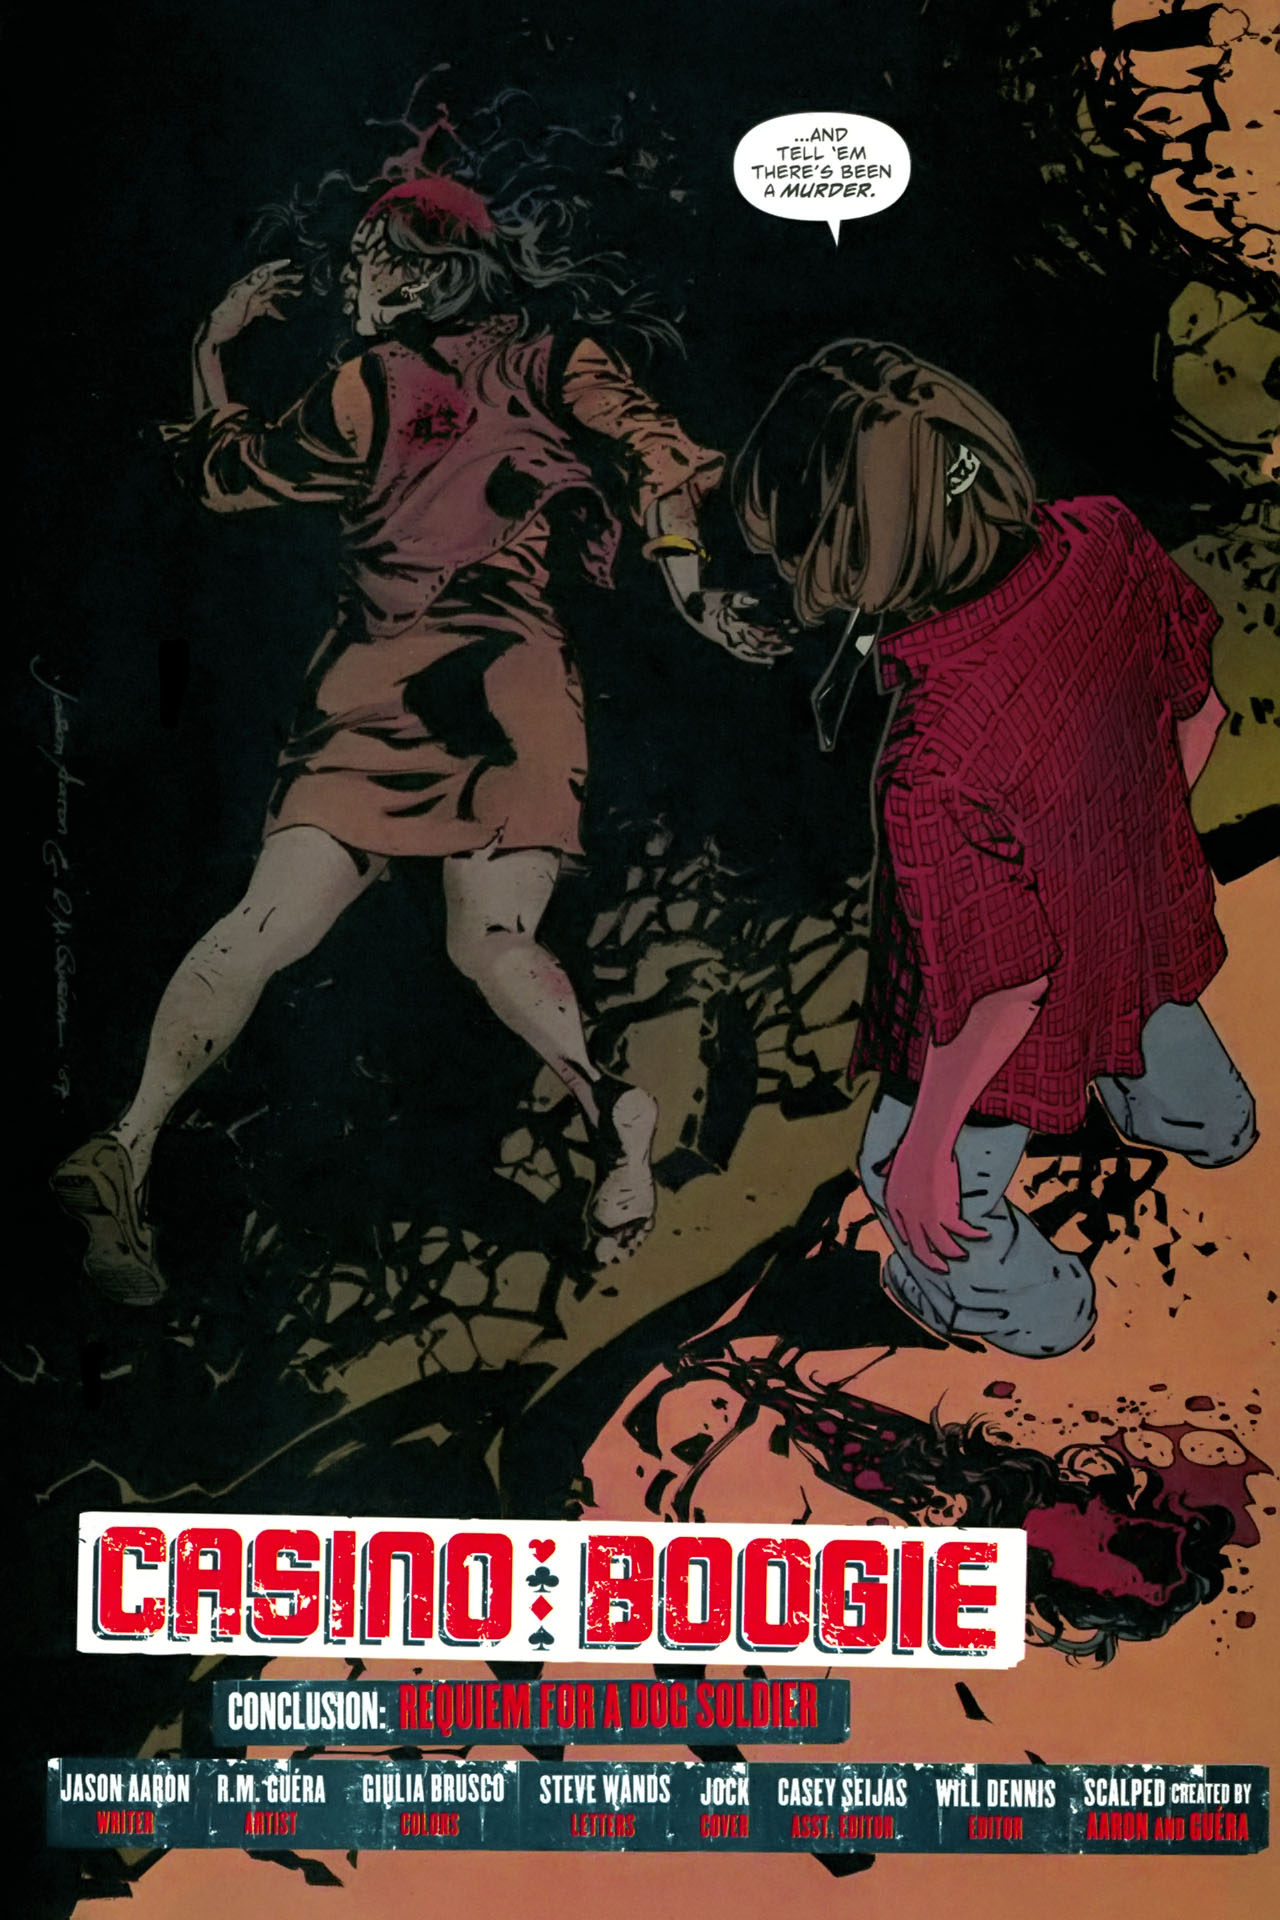 Scalped #11 - Casino Boogie, Conclusion: Requiem for a Dog Soldier